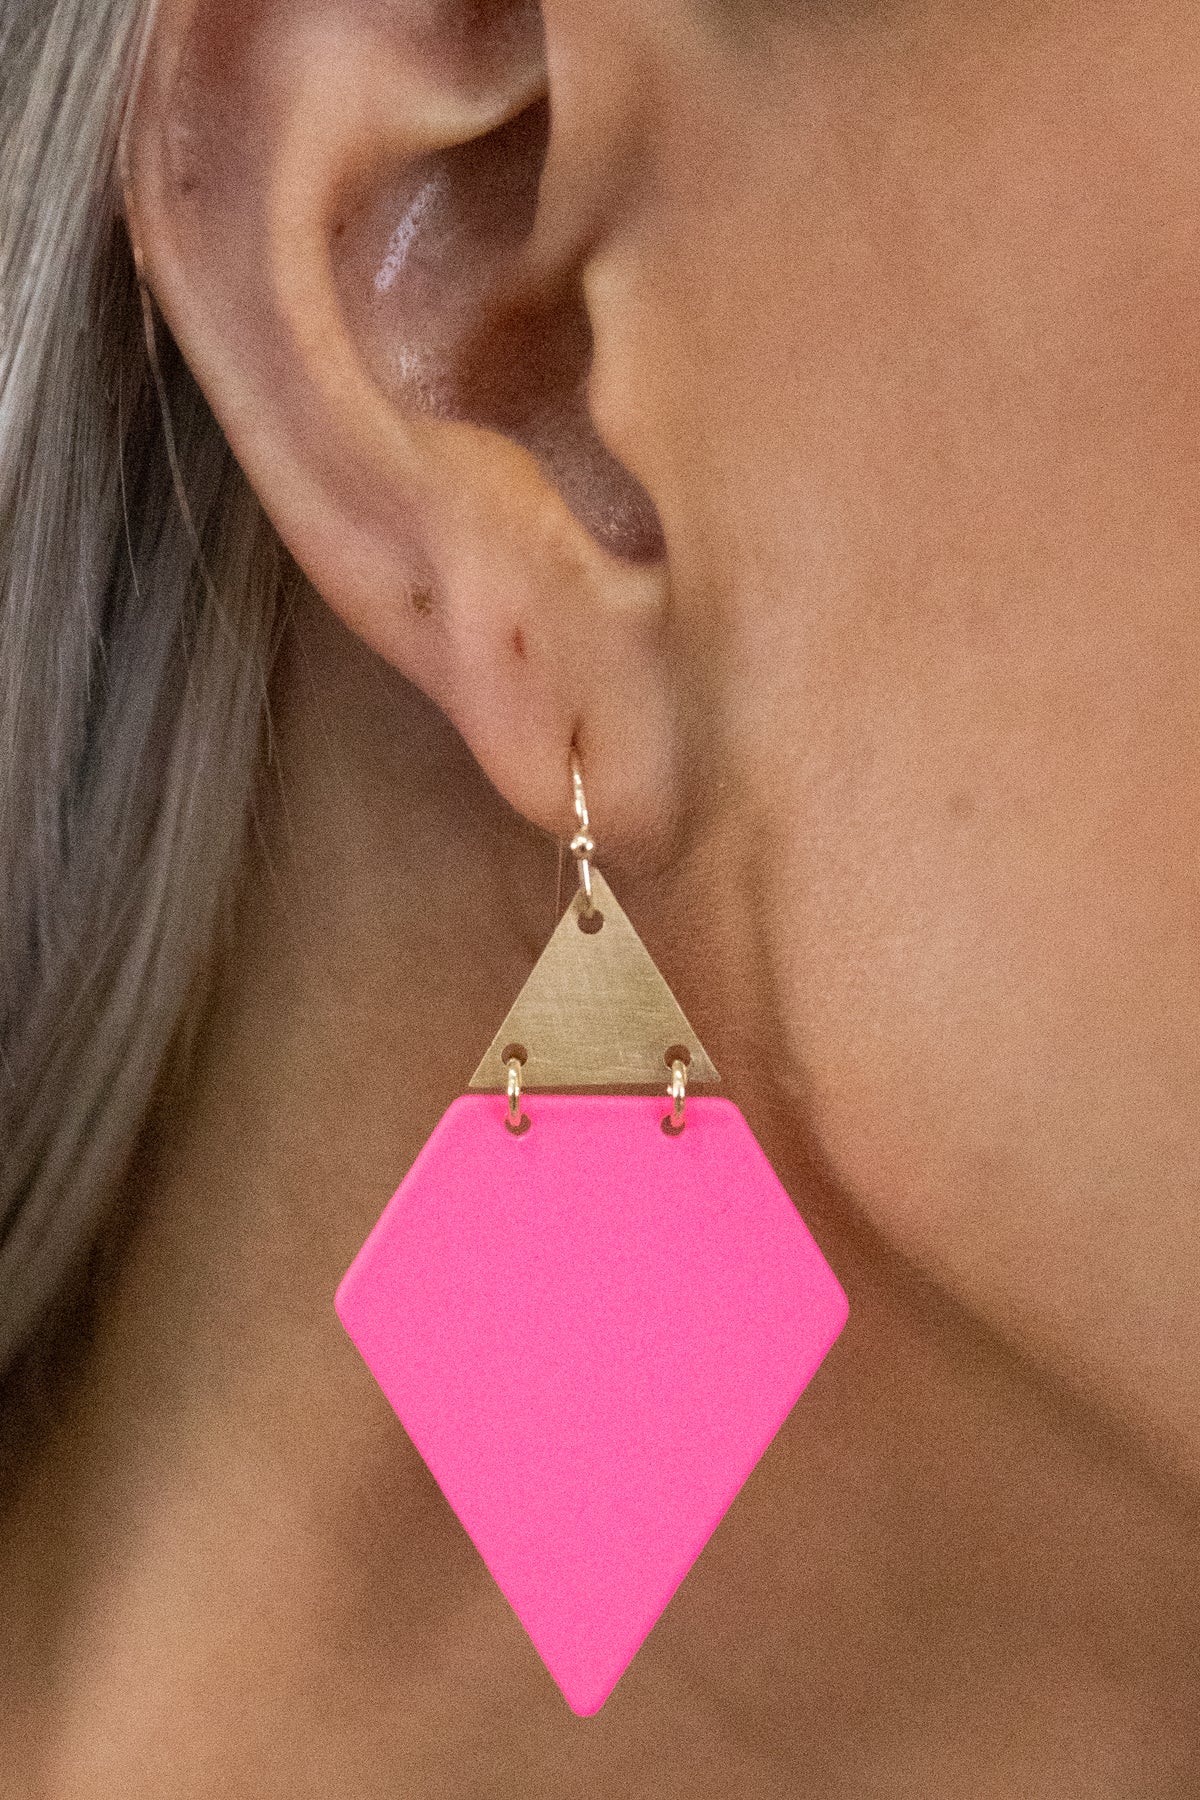 Hot Pink and Gold Diamond Shaped Earrings - Filly Flair